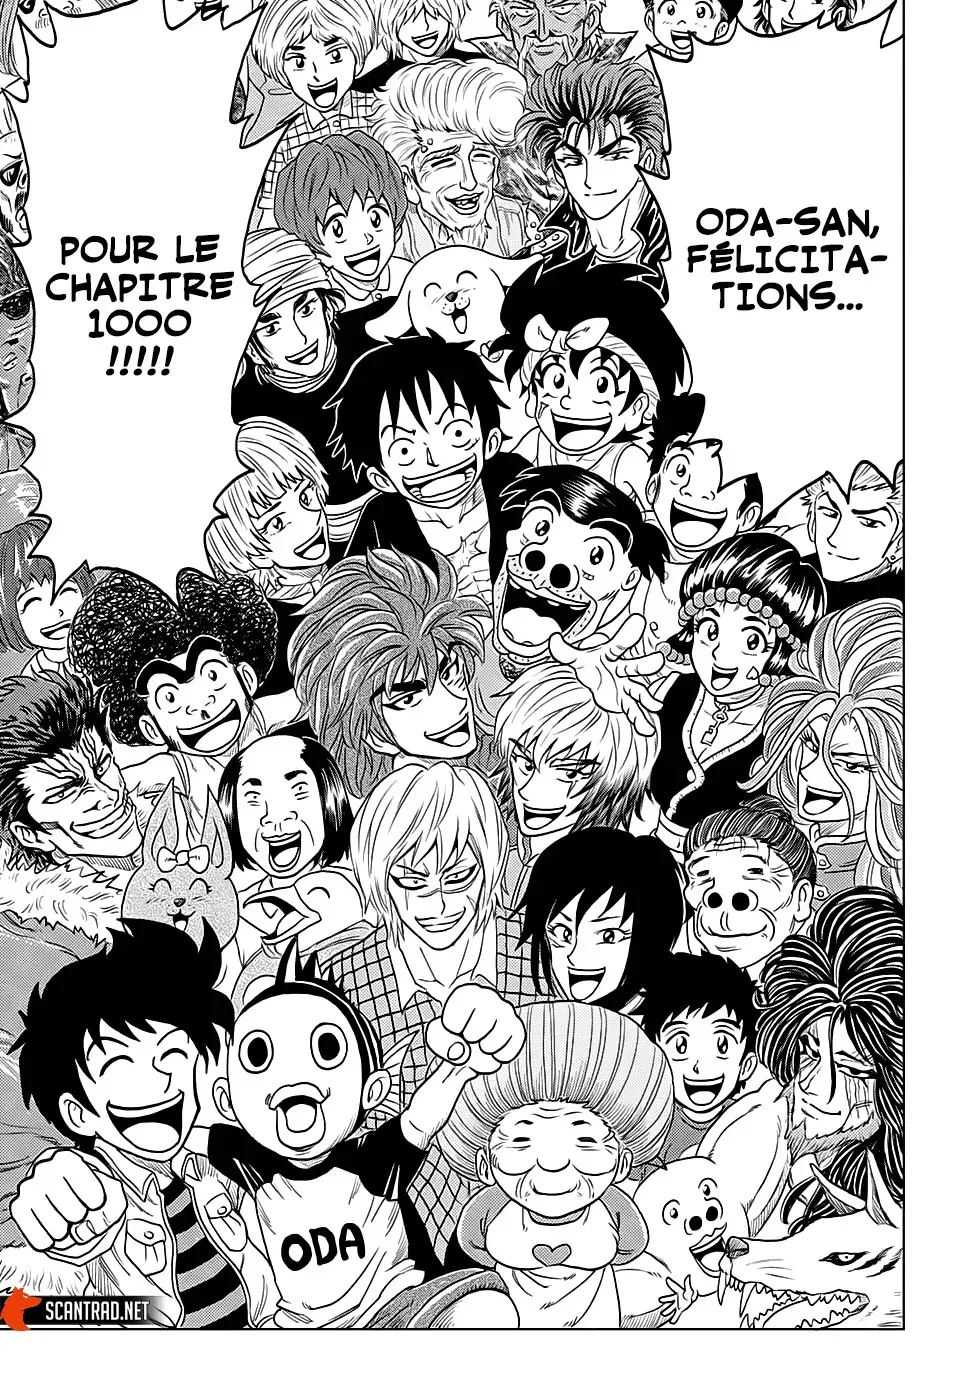 One Piece: Chapter chapitre-1000.5 - Page 21